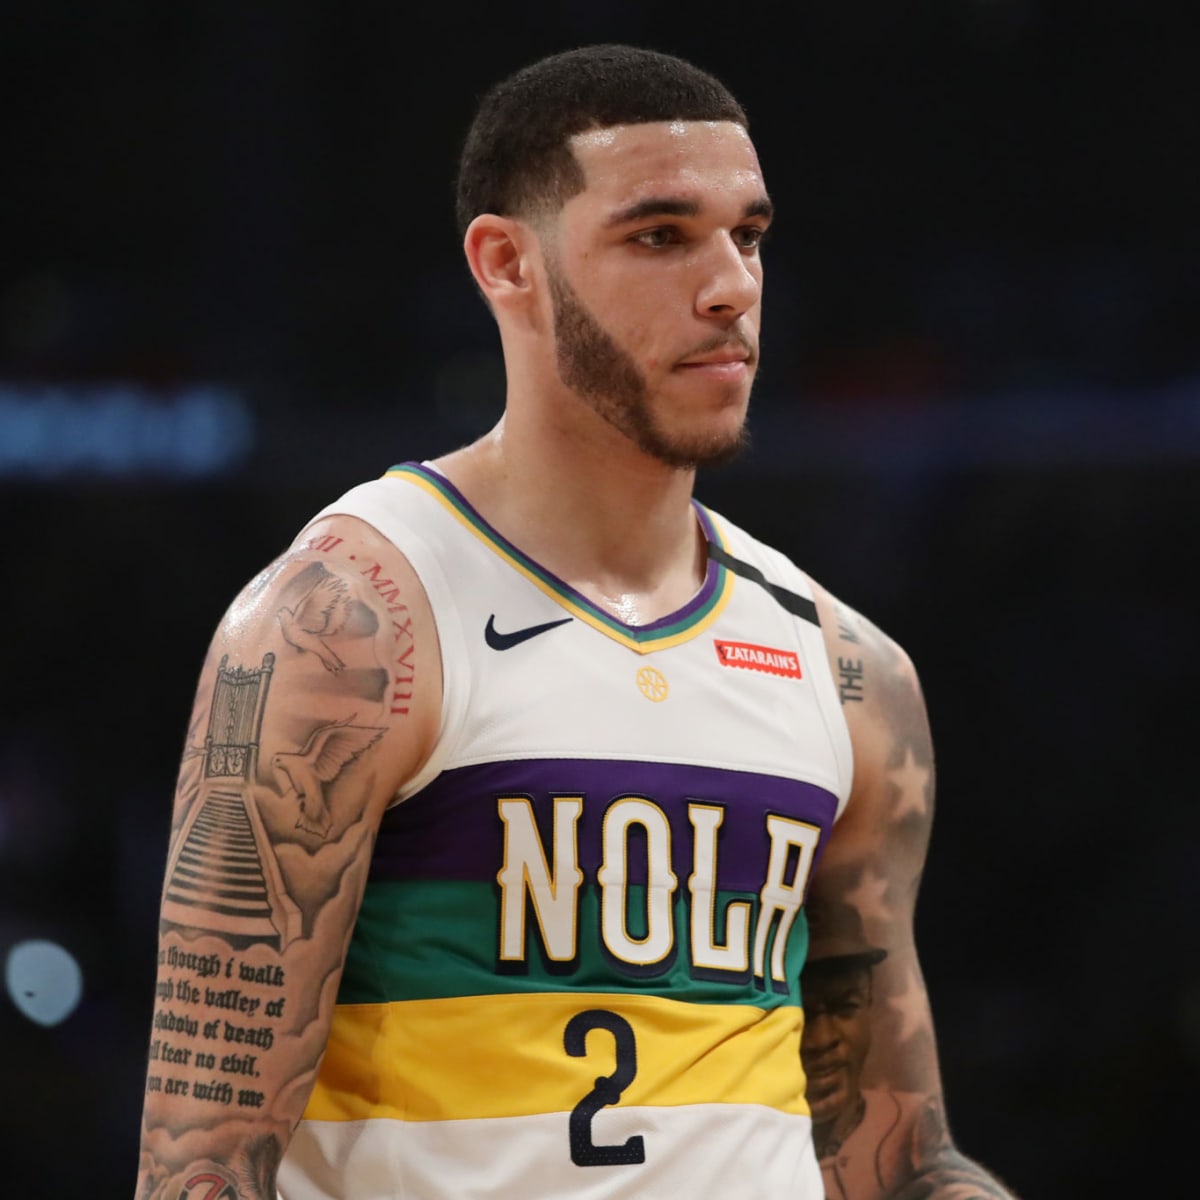 Lakers To Look Into Reacquiring Pelicans Guard Lonzo Ball: Report